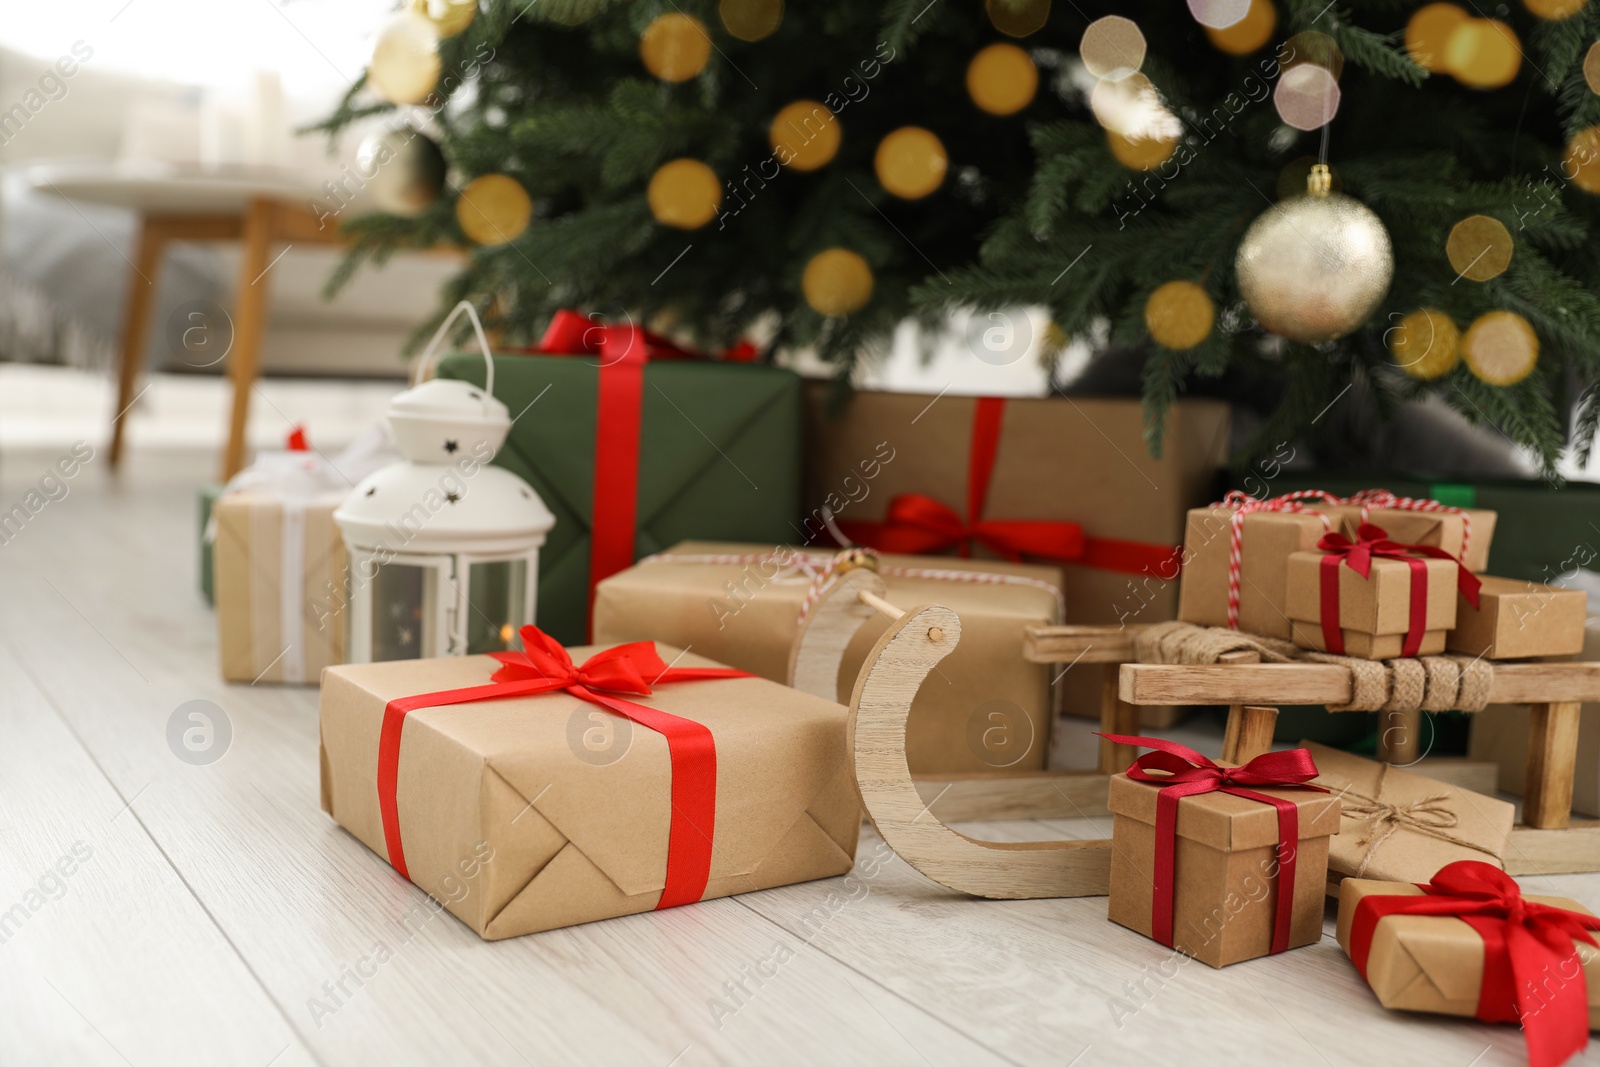 Photo of Beautifully wrapped gift boxes and wooden sleigh under Christmas tree indoors